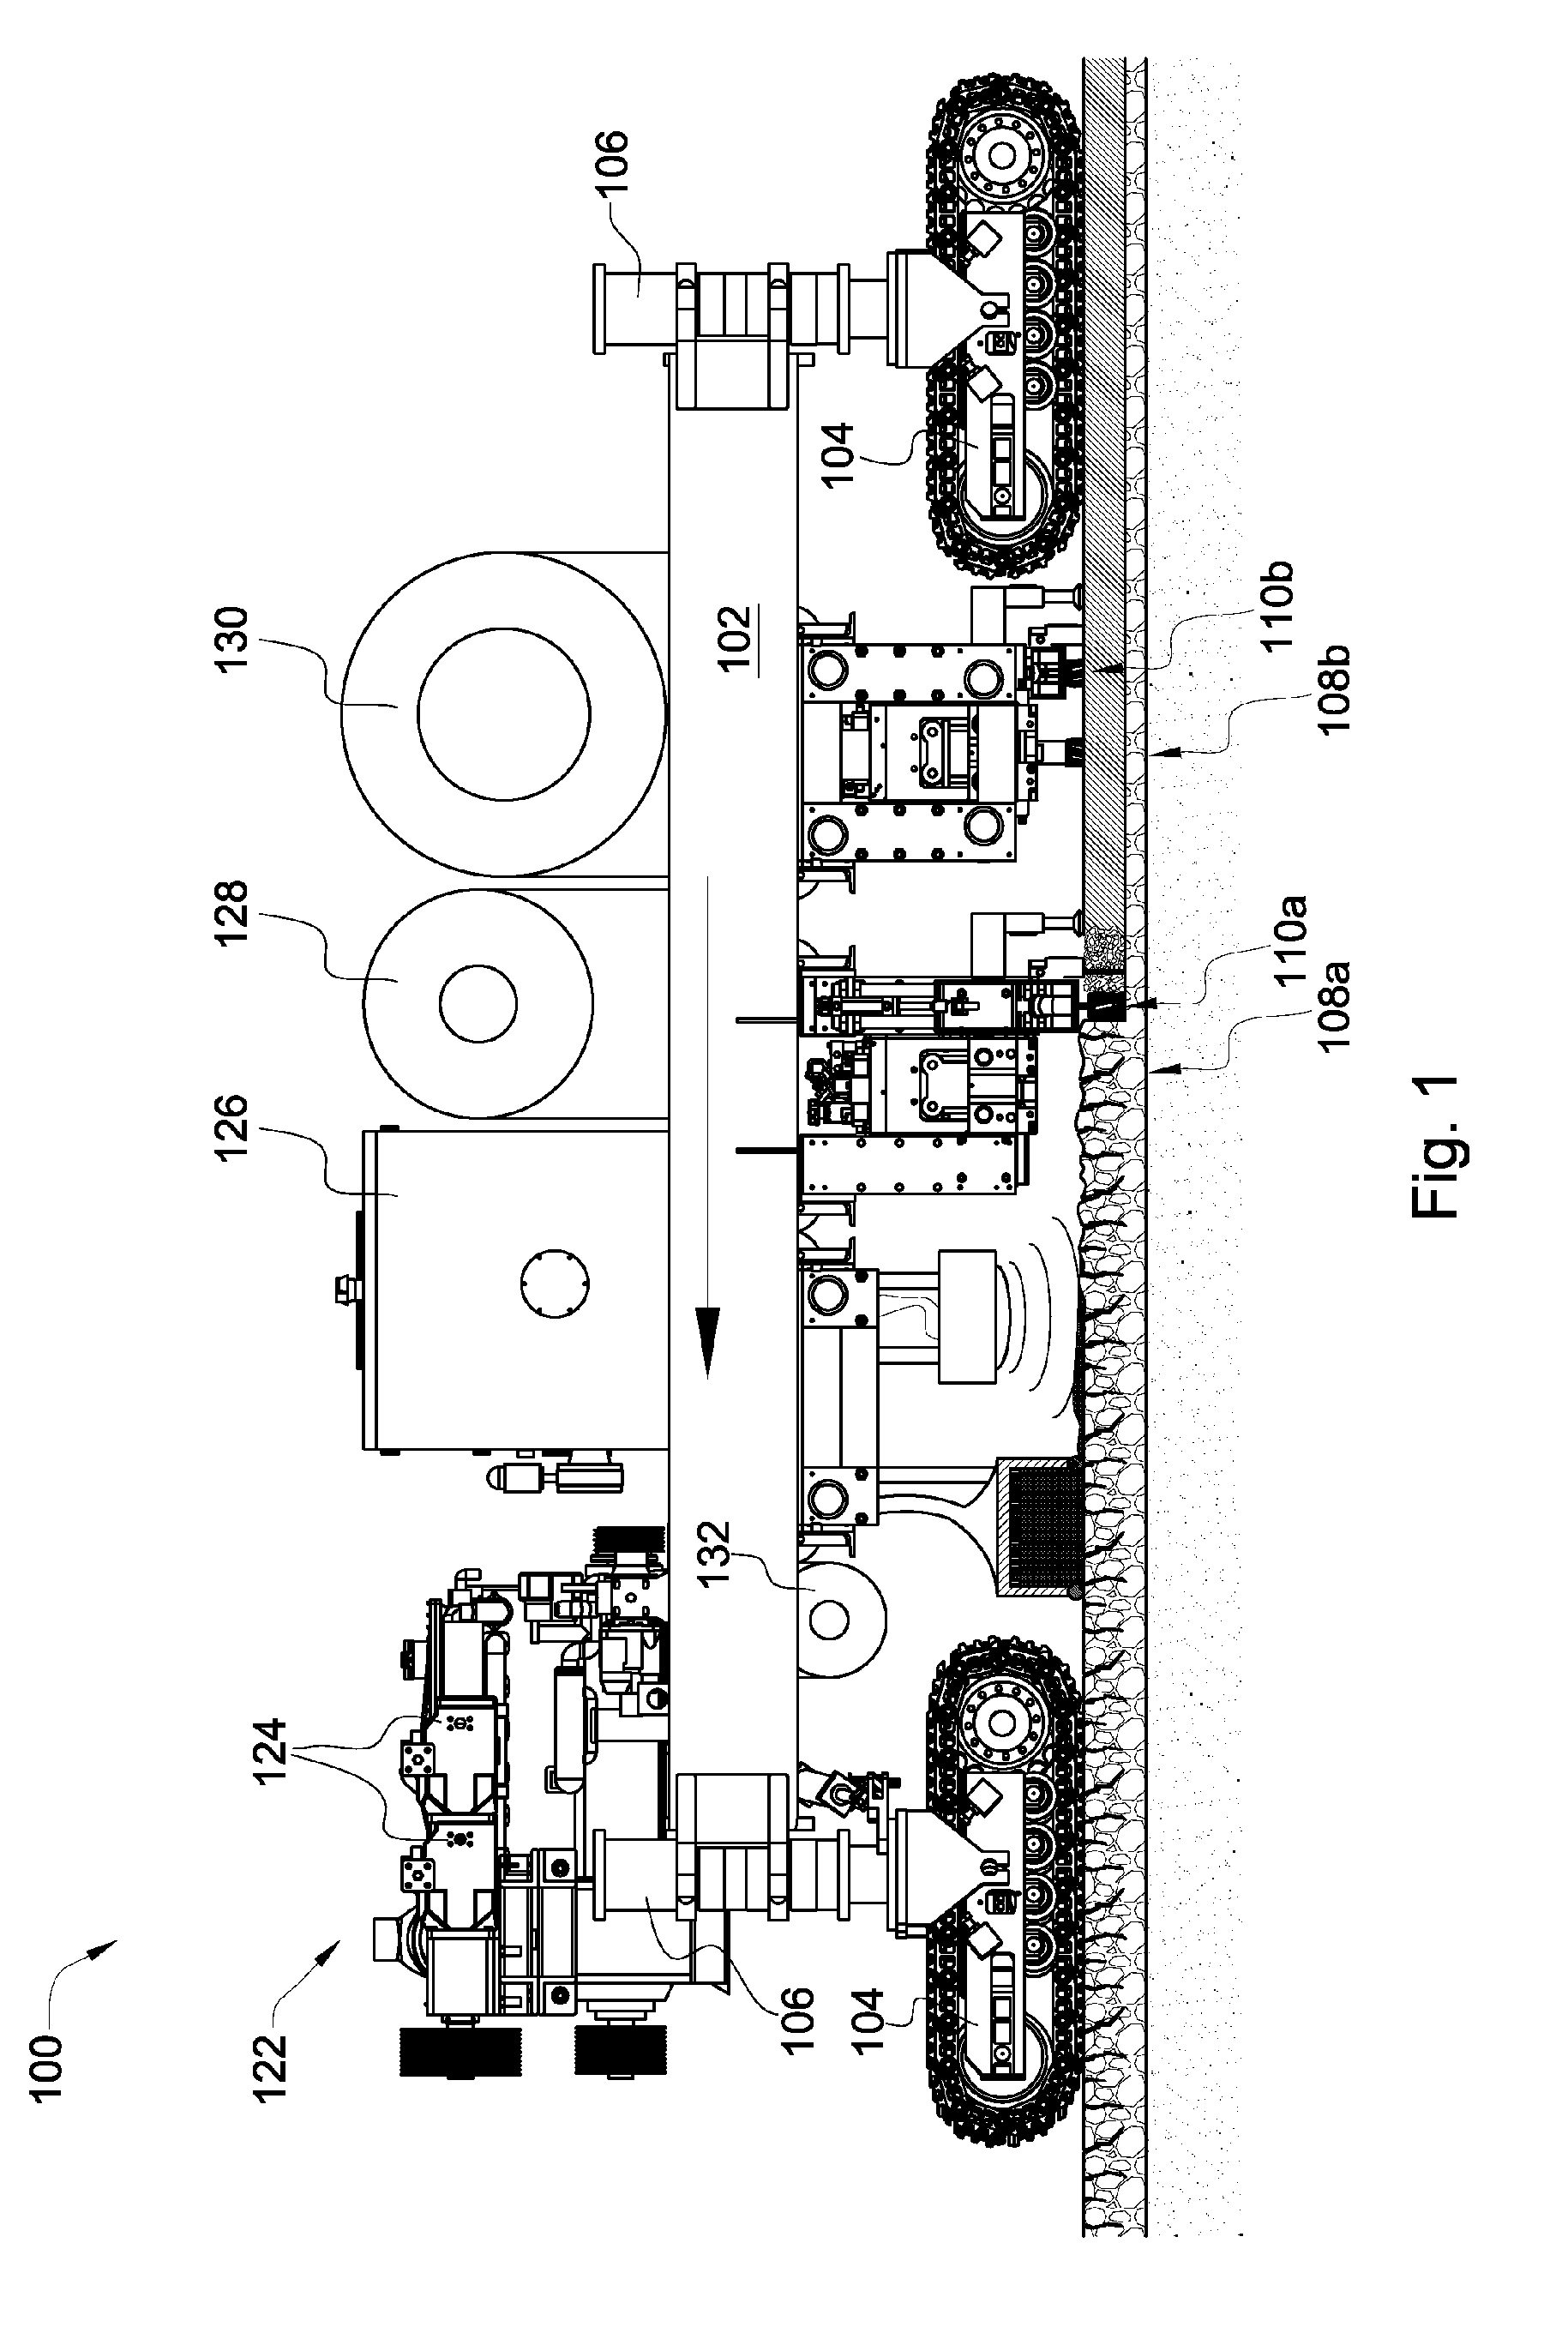 Apparatus and method for heating a paved surface with microwaves